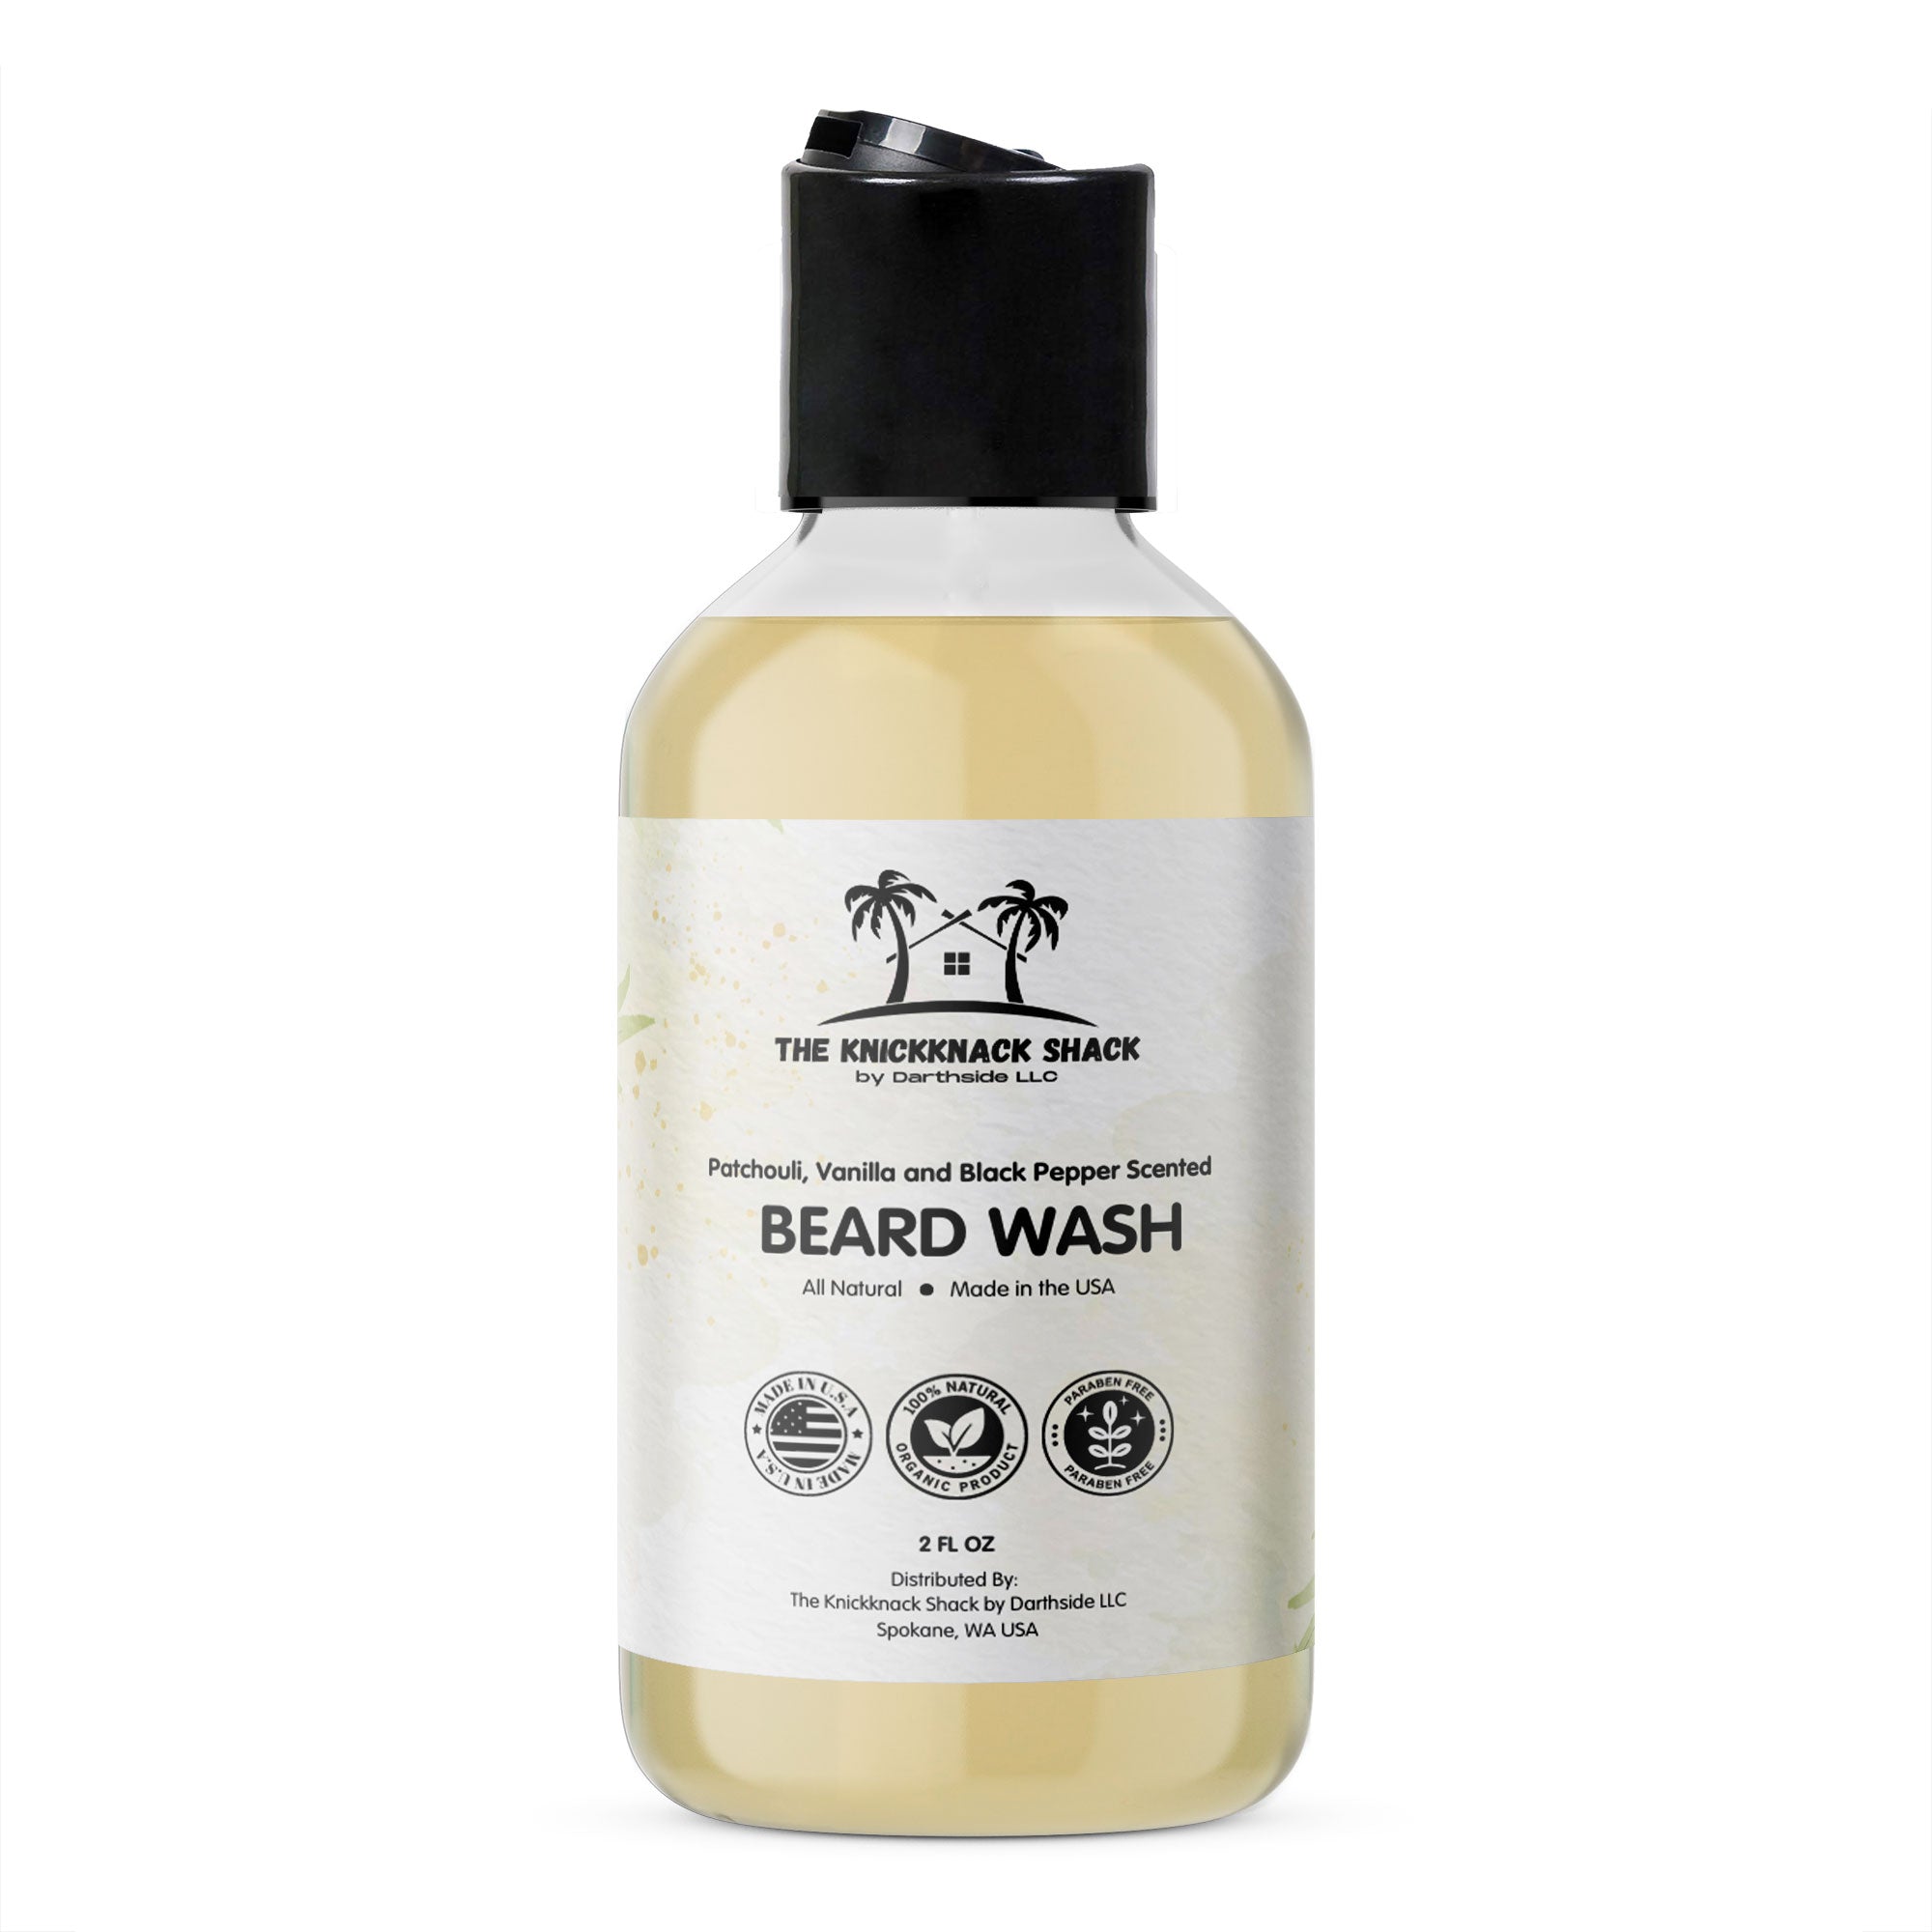 Patchouli, Vanilla and Black Pepper Scented Beard Wash